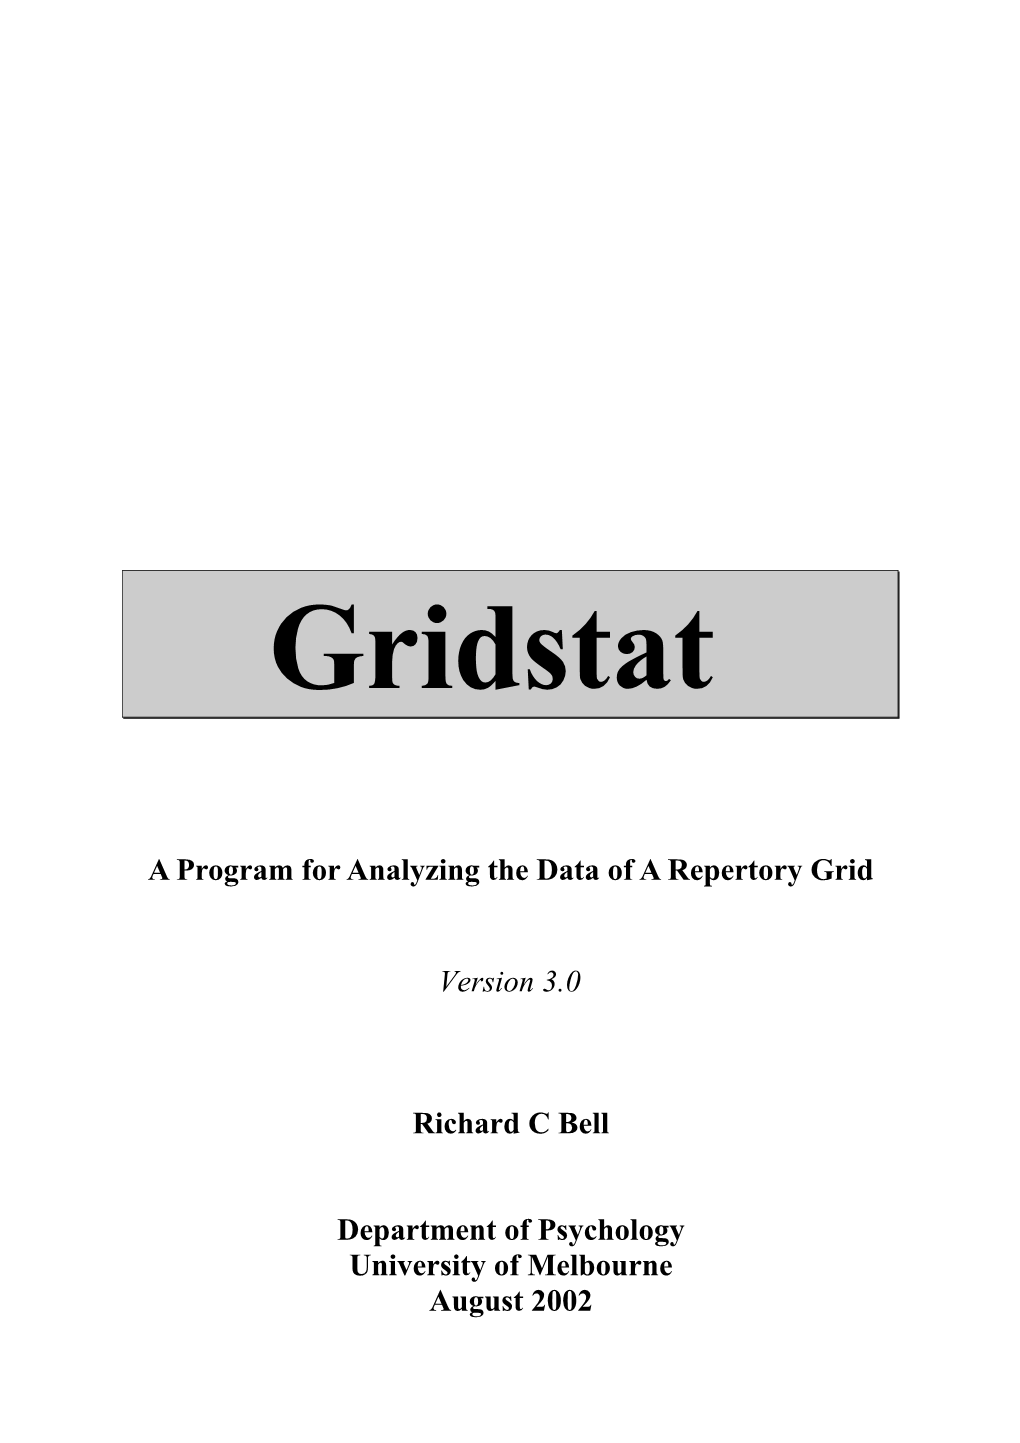 A Program for Analyzing the Data of a Repertory Grid